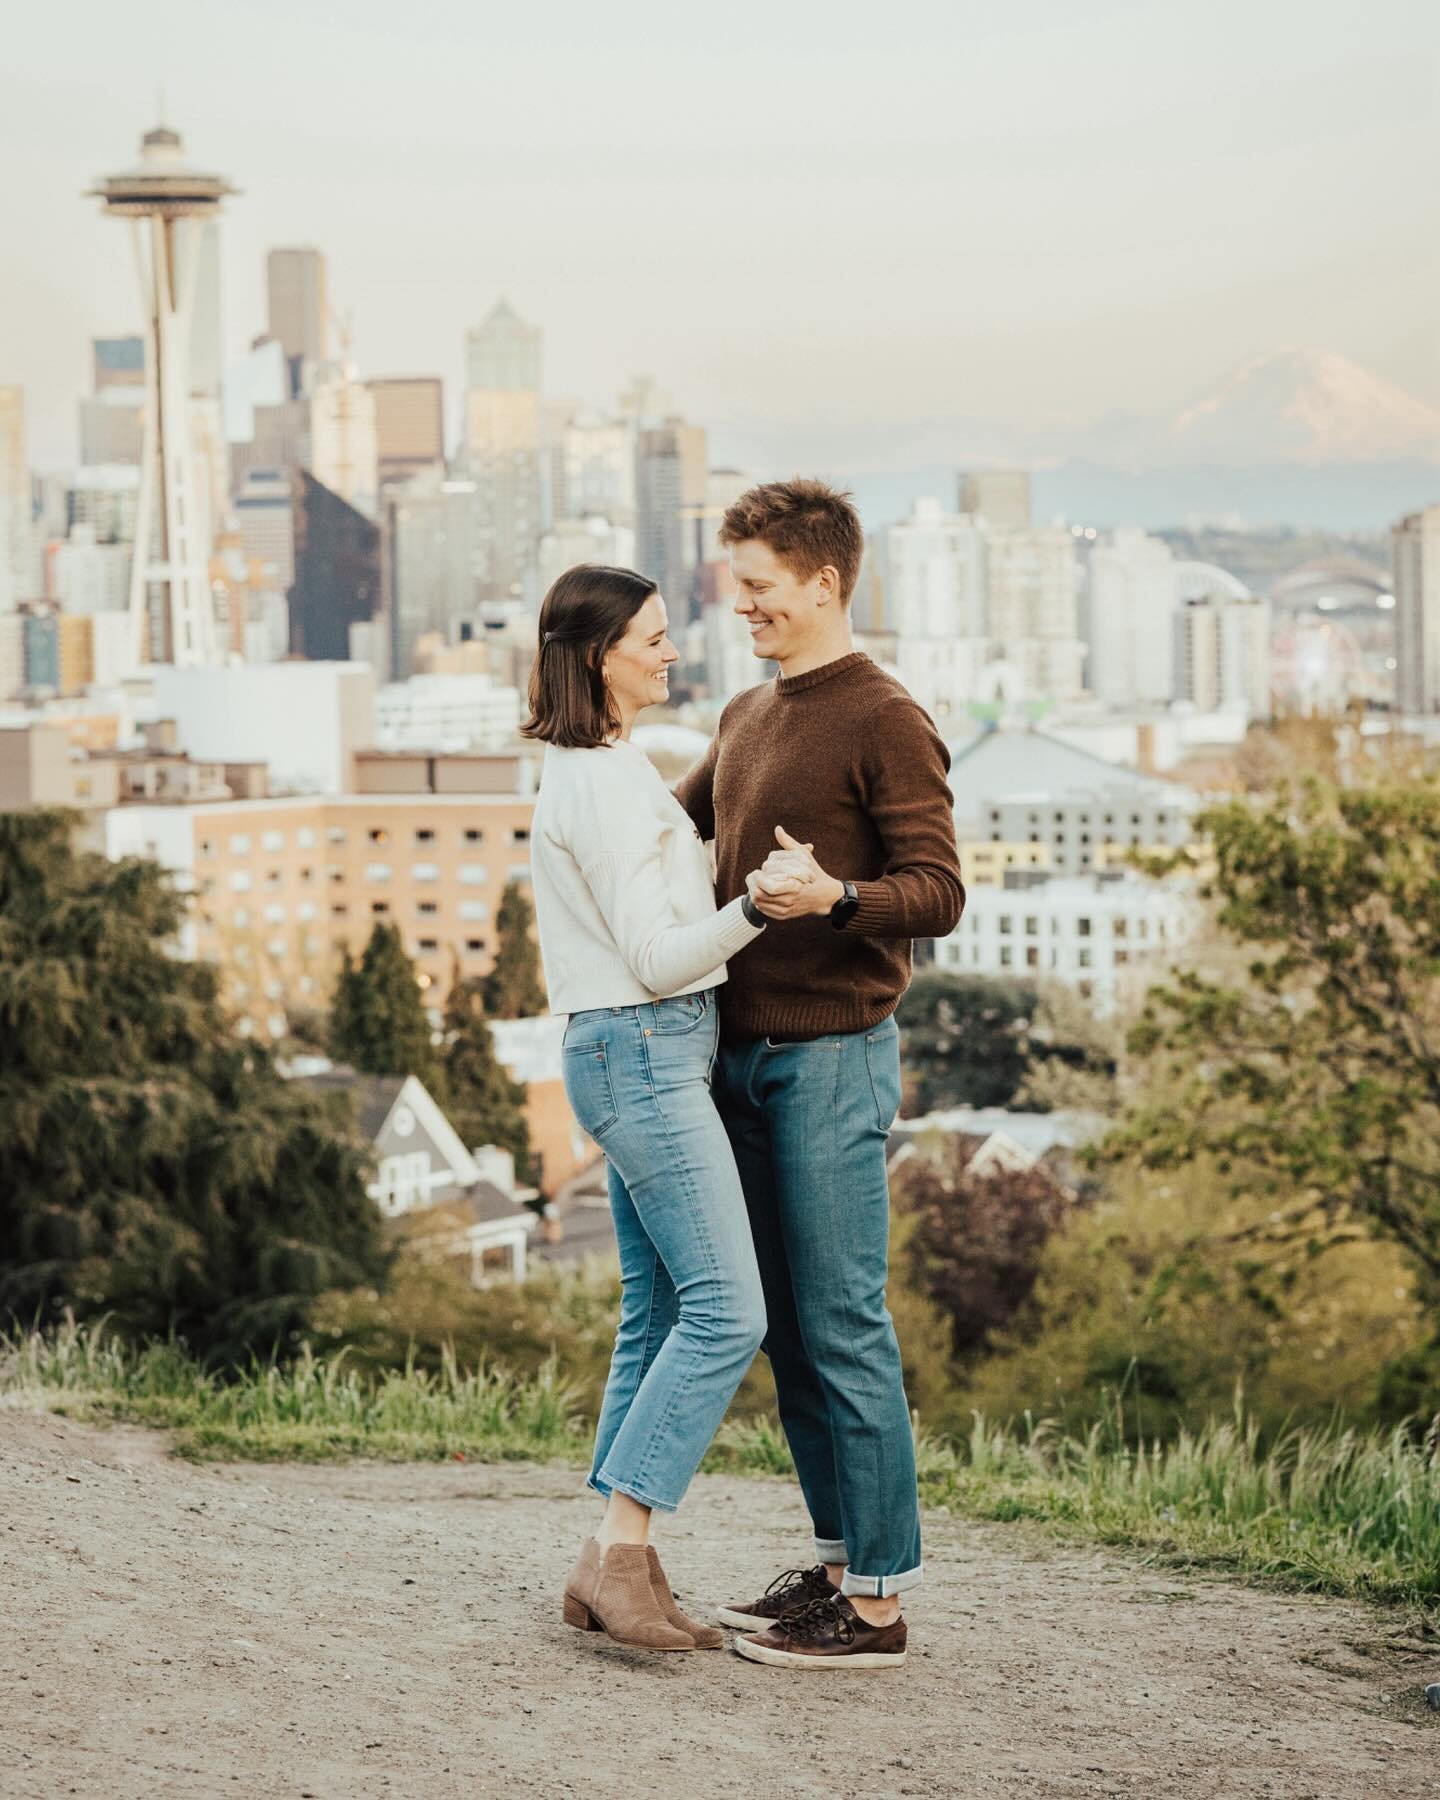 The view of the city skyline at dusk stays undefeated. And when the skies are so clear that Mt. Rainier makes an appearance, you are left with a sight that never gets old.

Those details are meaningful for Lexi and Max&rsquo;s engagement session, as 